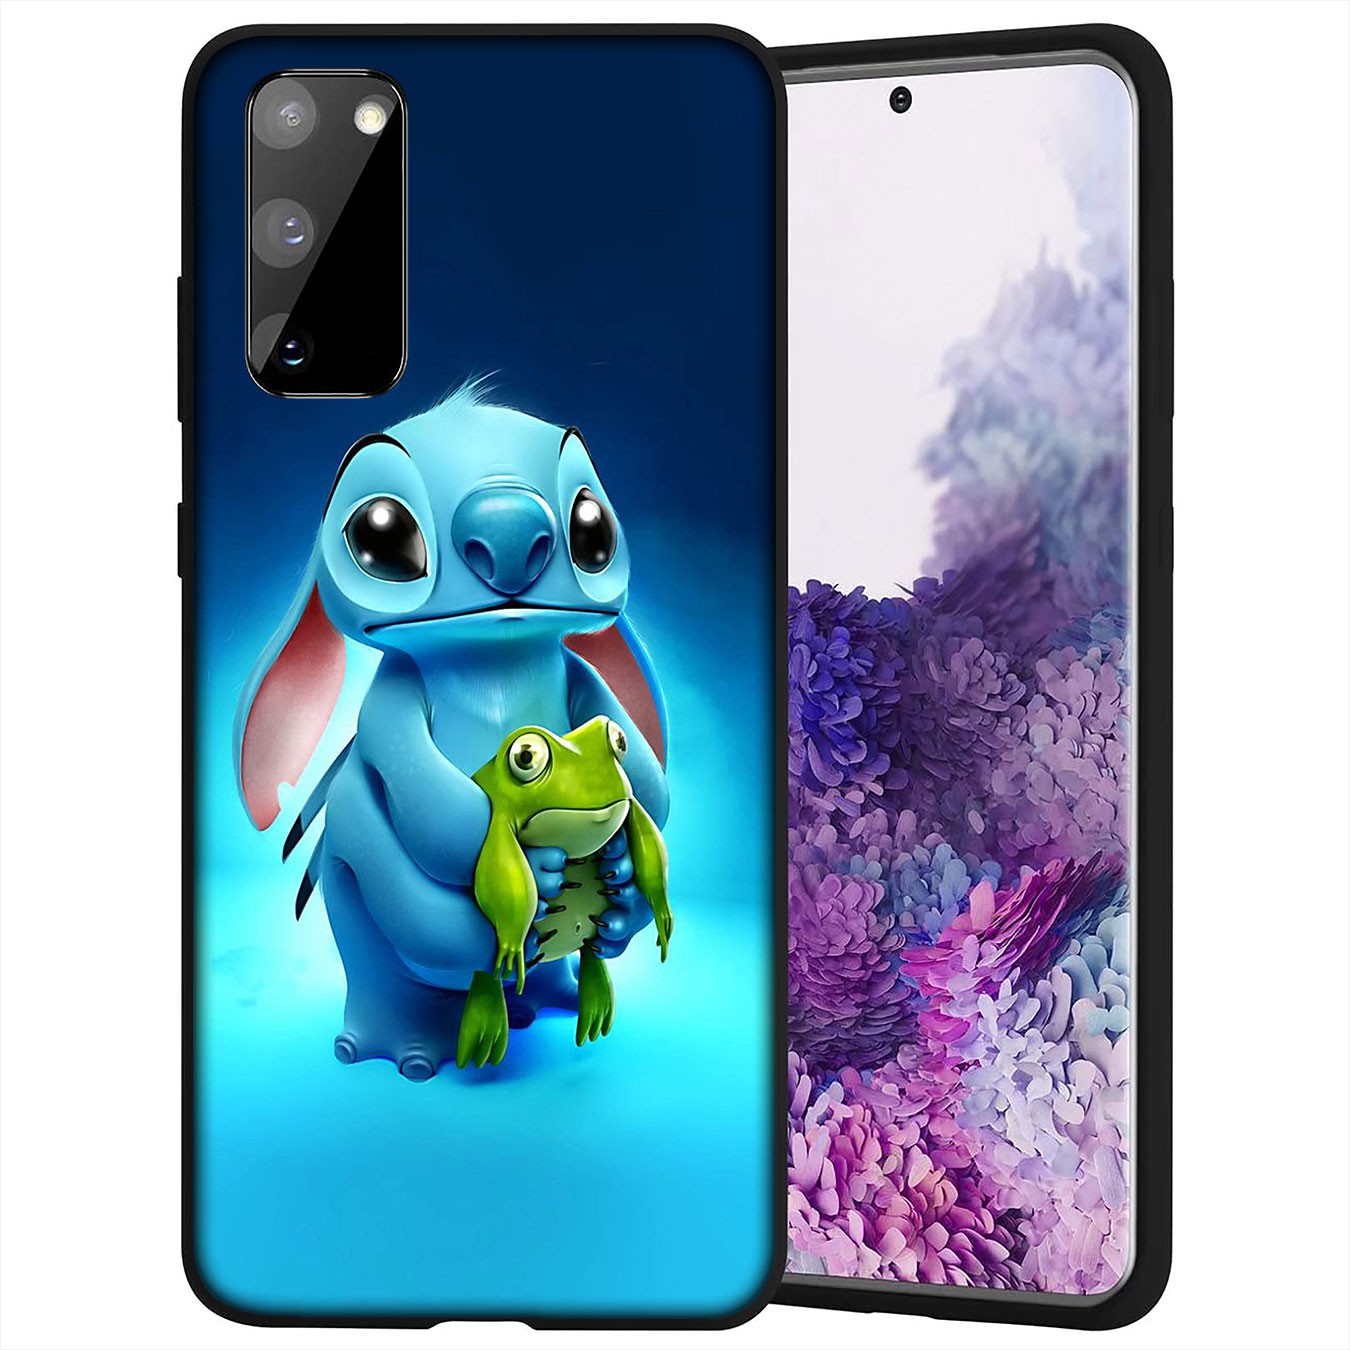 VIVO V20 SE Pro V19 V15 V11 Y55 Y81 Y70 2020 Y55s Y81s Y53 VIVOV20 Casing Soft Silicone H66 Lovely Stitch cute Phone Case